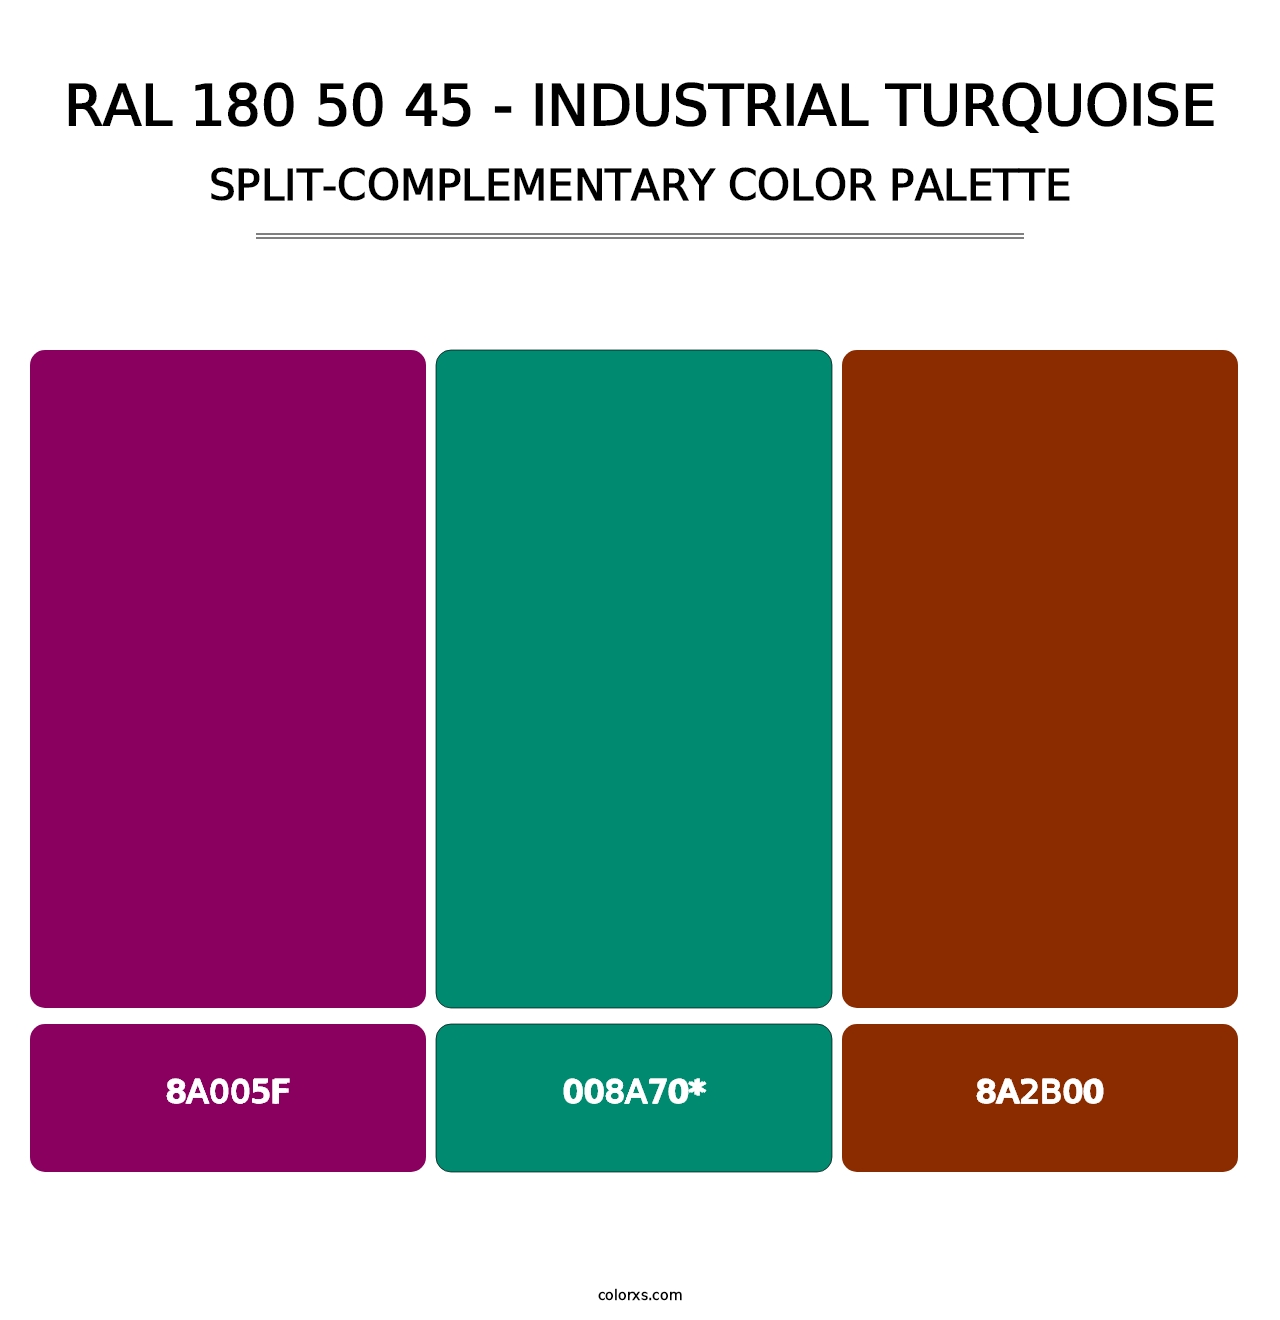 RAL 180 50 45 - Industrial Turquoise - Split-Complementary Color Palette